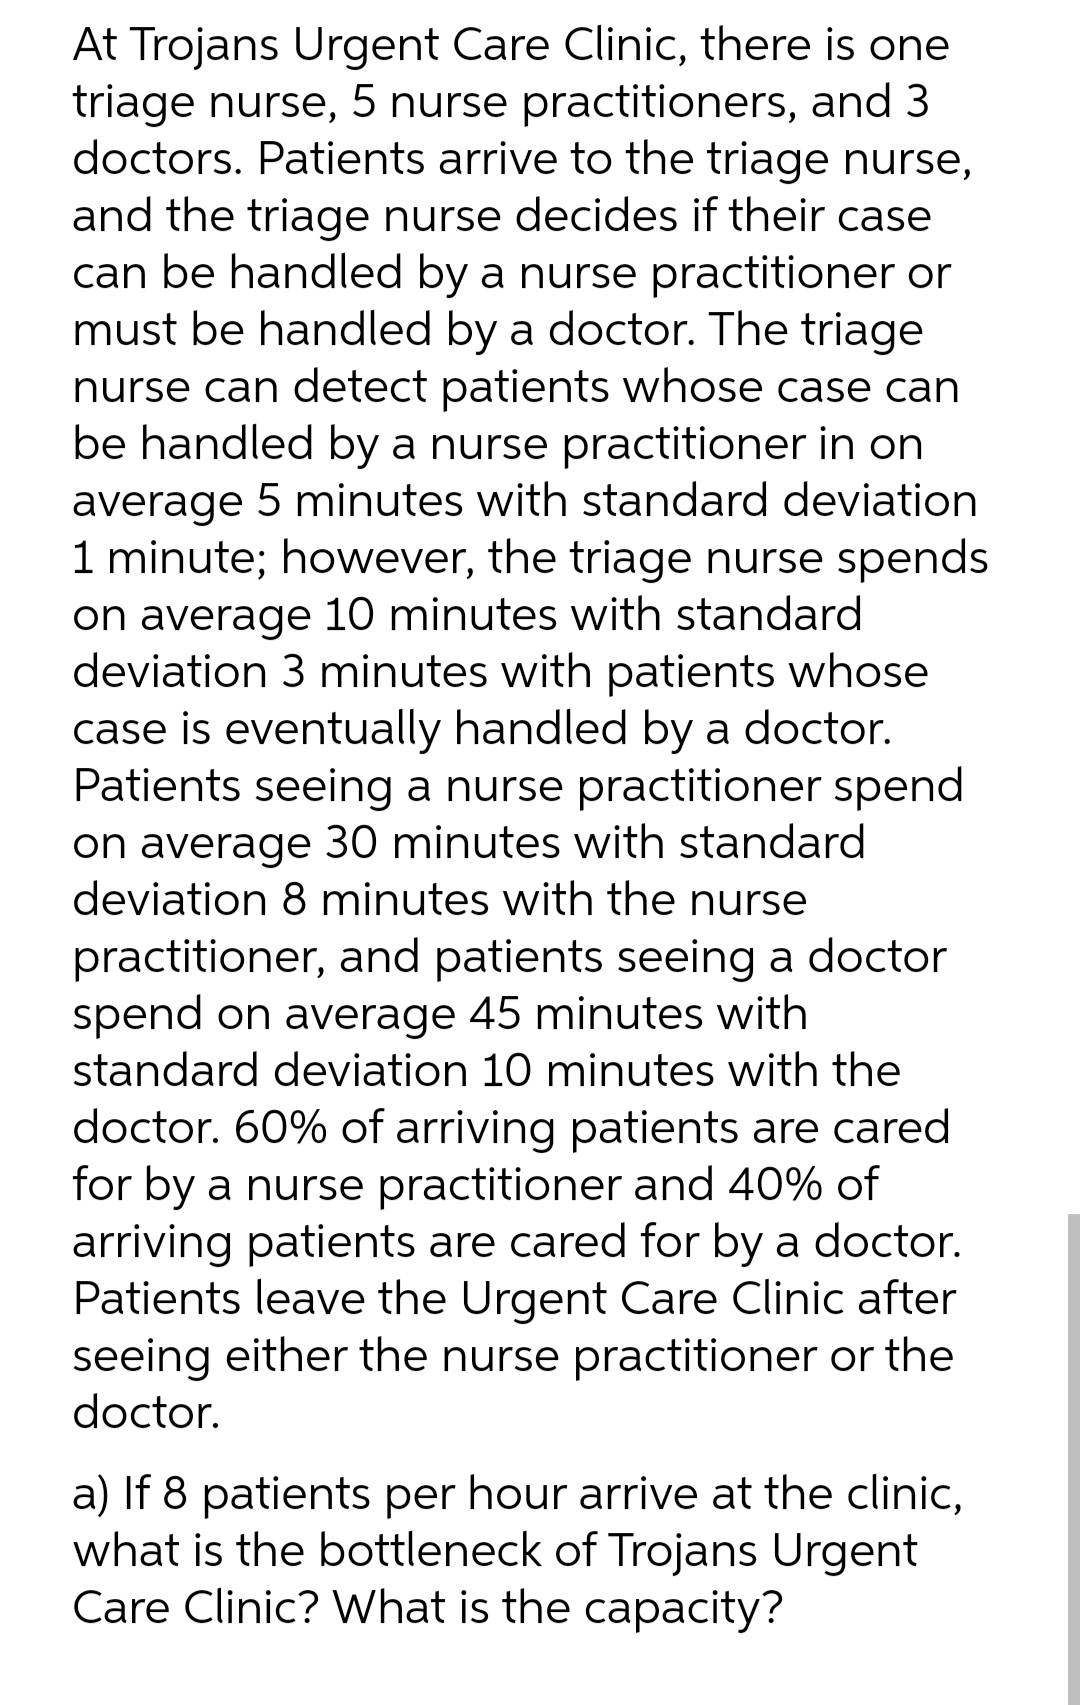 At Trojans Urgent Care Clinic, there is one
triage nurse, 5 nurse practitioners, and 3
doctors. Patients arrive to the triage nurse,
and the triage nurse decides if their case
can be handled by a nurse practitioner or
must be handled by a doctor. The triage
nurse can detect patients whose case can
be handled by a nurse practitioner in on
average 5 minutes with standard deviation
1 minute; however, the triage nurse spends
on average 10 minutes with standard
deviation 3 minutes with patients whose
case is eventually handled by a doctor.
Patients seeing a nurse practitioner spend
on average 30 minutes with standard
deviation 8 minutes with the nurse
practitioner, and patients seeing a doctor
spend on average 45 minutes with
standard deviation 10 minutes with the
doctor. 60% of arriving patients are cared
for by a nurse practitioner and 40% of
arriving patients are cared for by a doctor.
Patients leave the Urgent Care Clinic after
seeing either the nurse practitioner or the
doctor.
a) If 8 patients per hour arrive at the clinic,
what is the bottleneck of Trojans Urgent
Care Clinic? What is the capacity?
